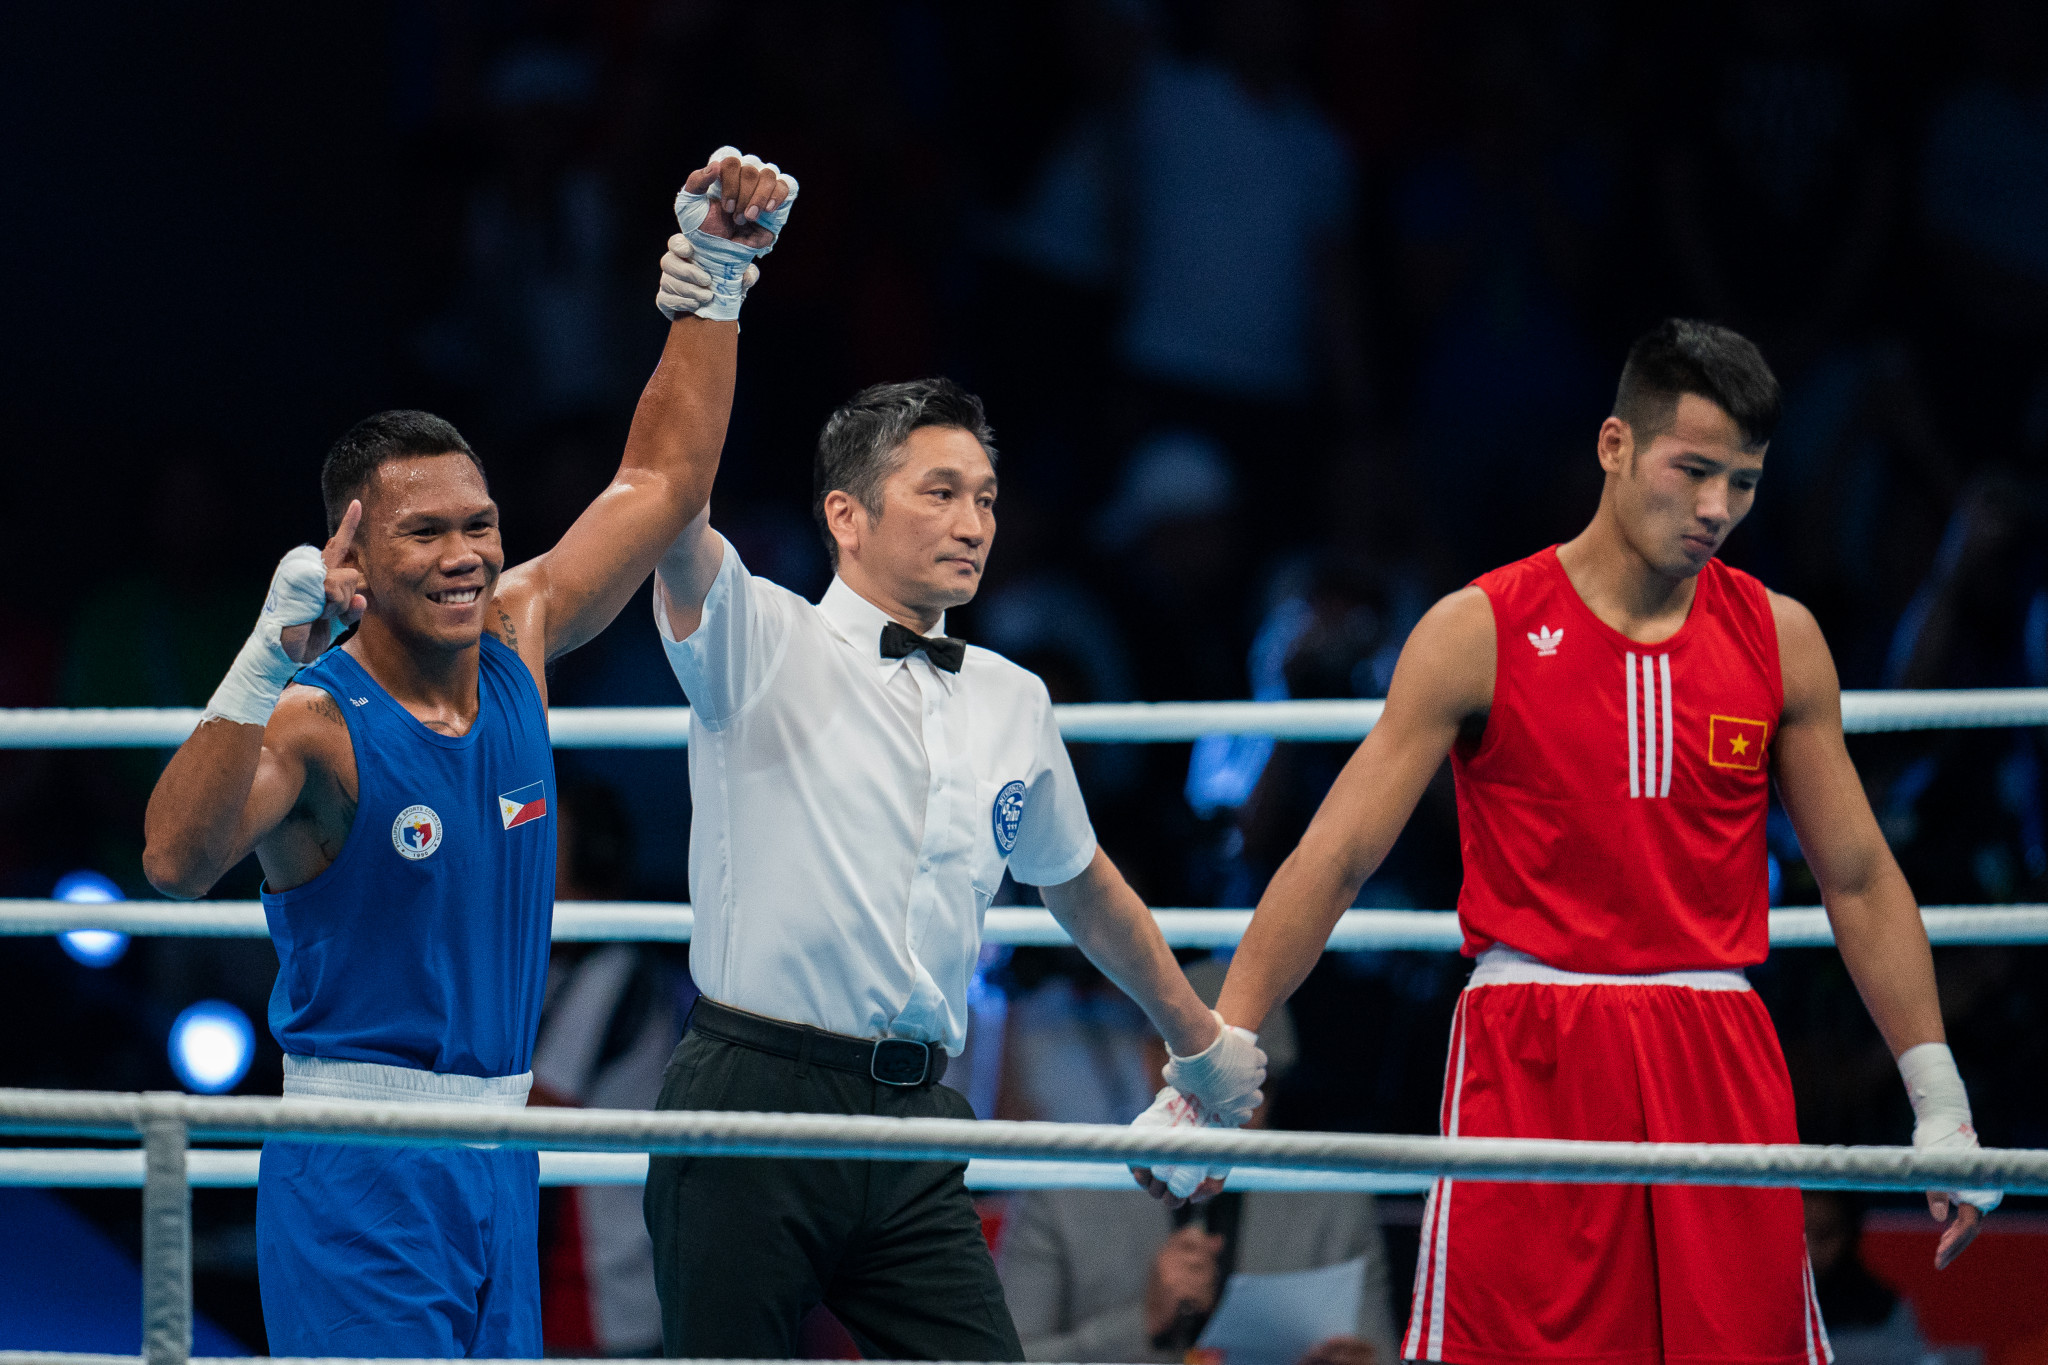 Philippines offer to host Asia and Oceania Olympic boxing qualifier if moved from Wuhan